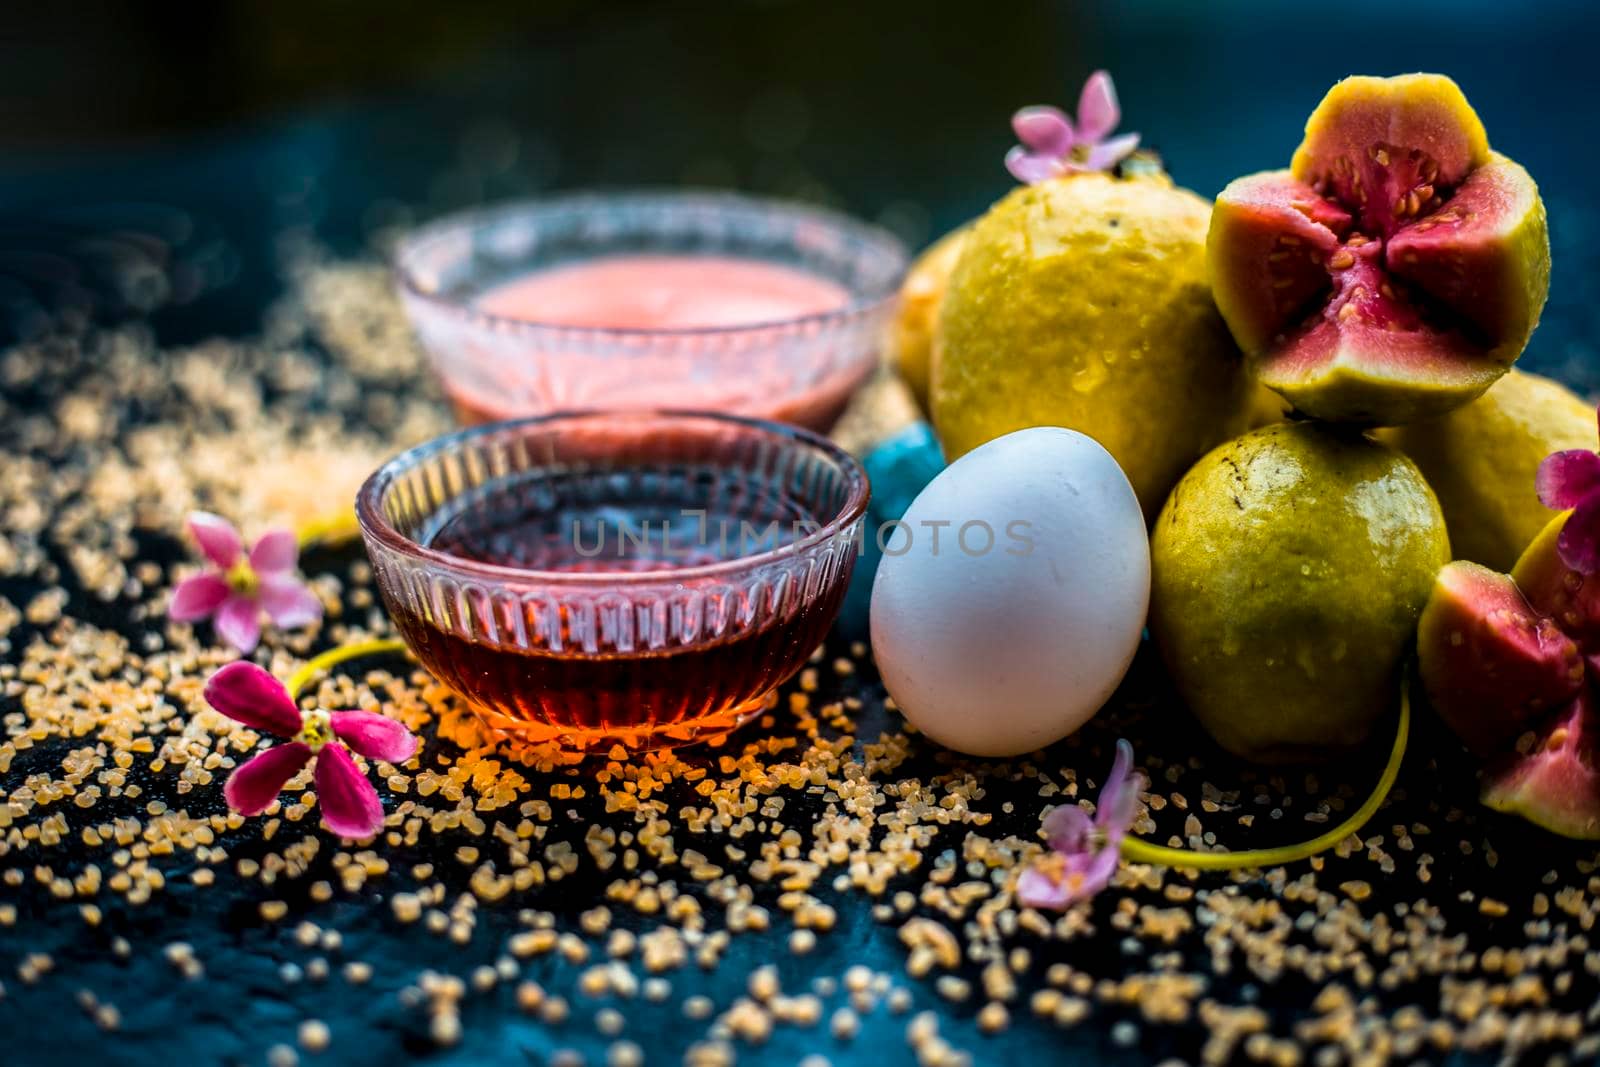 Treatment of dry skin with the help of face mask on a wooden surface consisting of honey, guava pulp, egg yolk, and some oatmeal, well mixed in a glass bowl along with raw ingredients. by mirzamlk